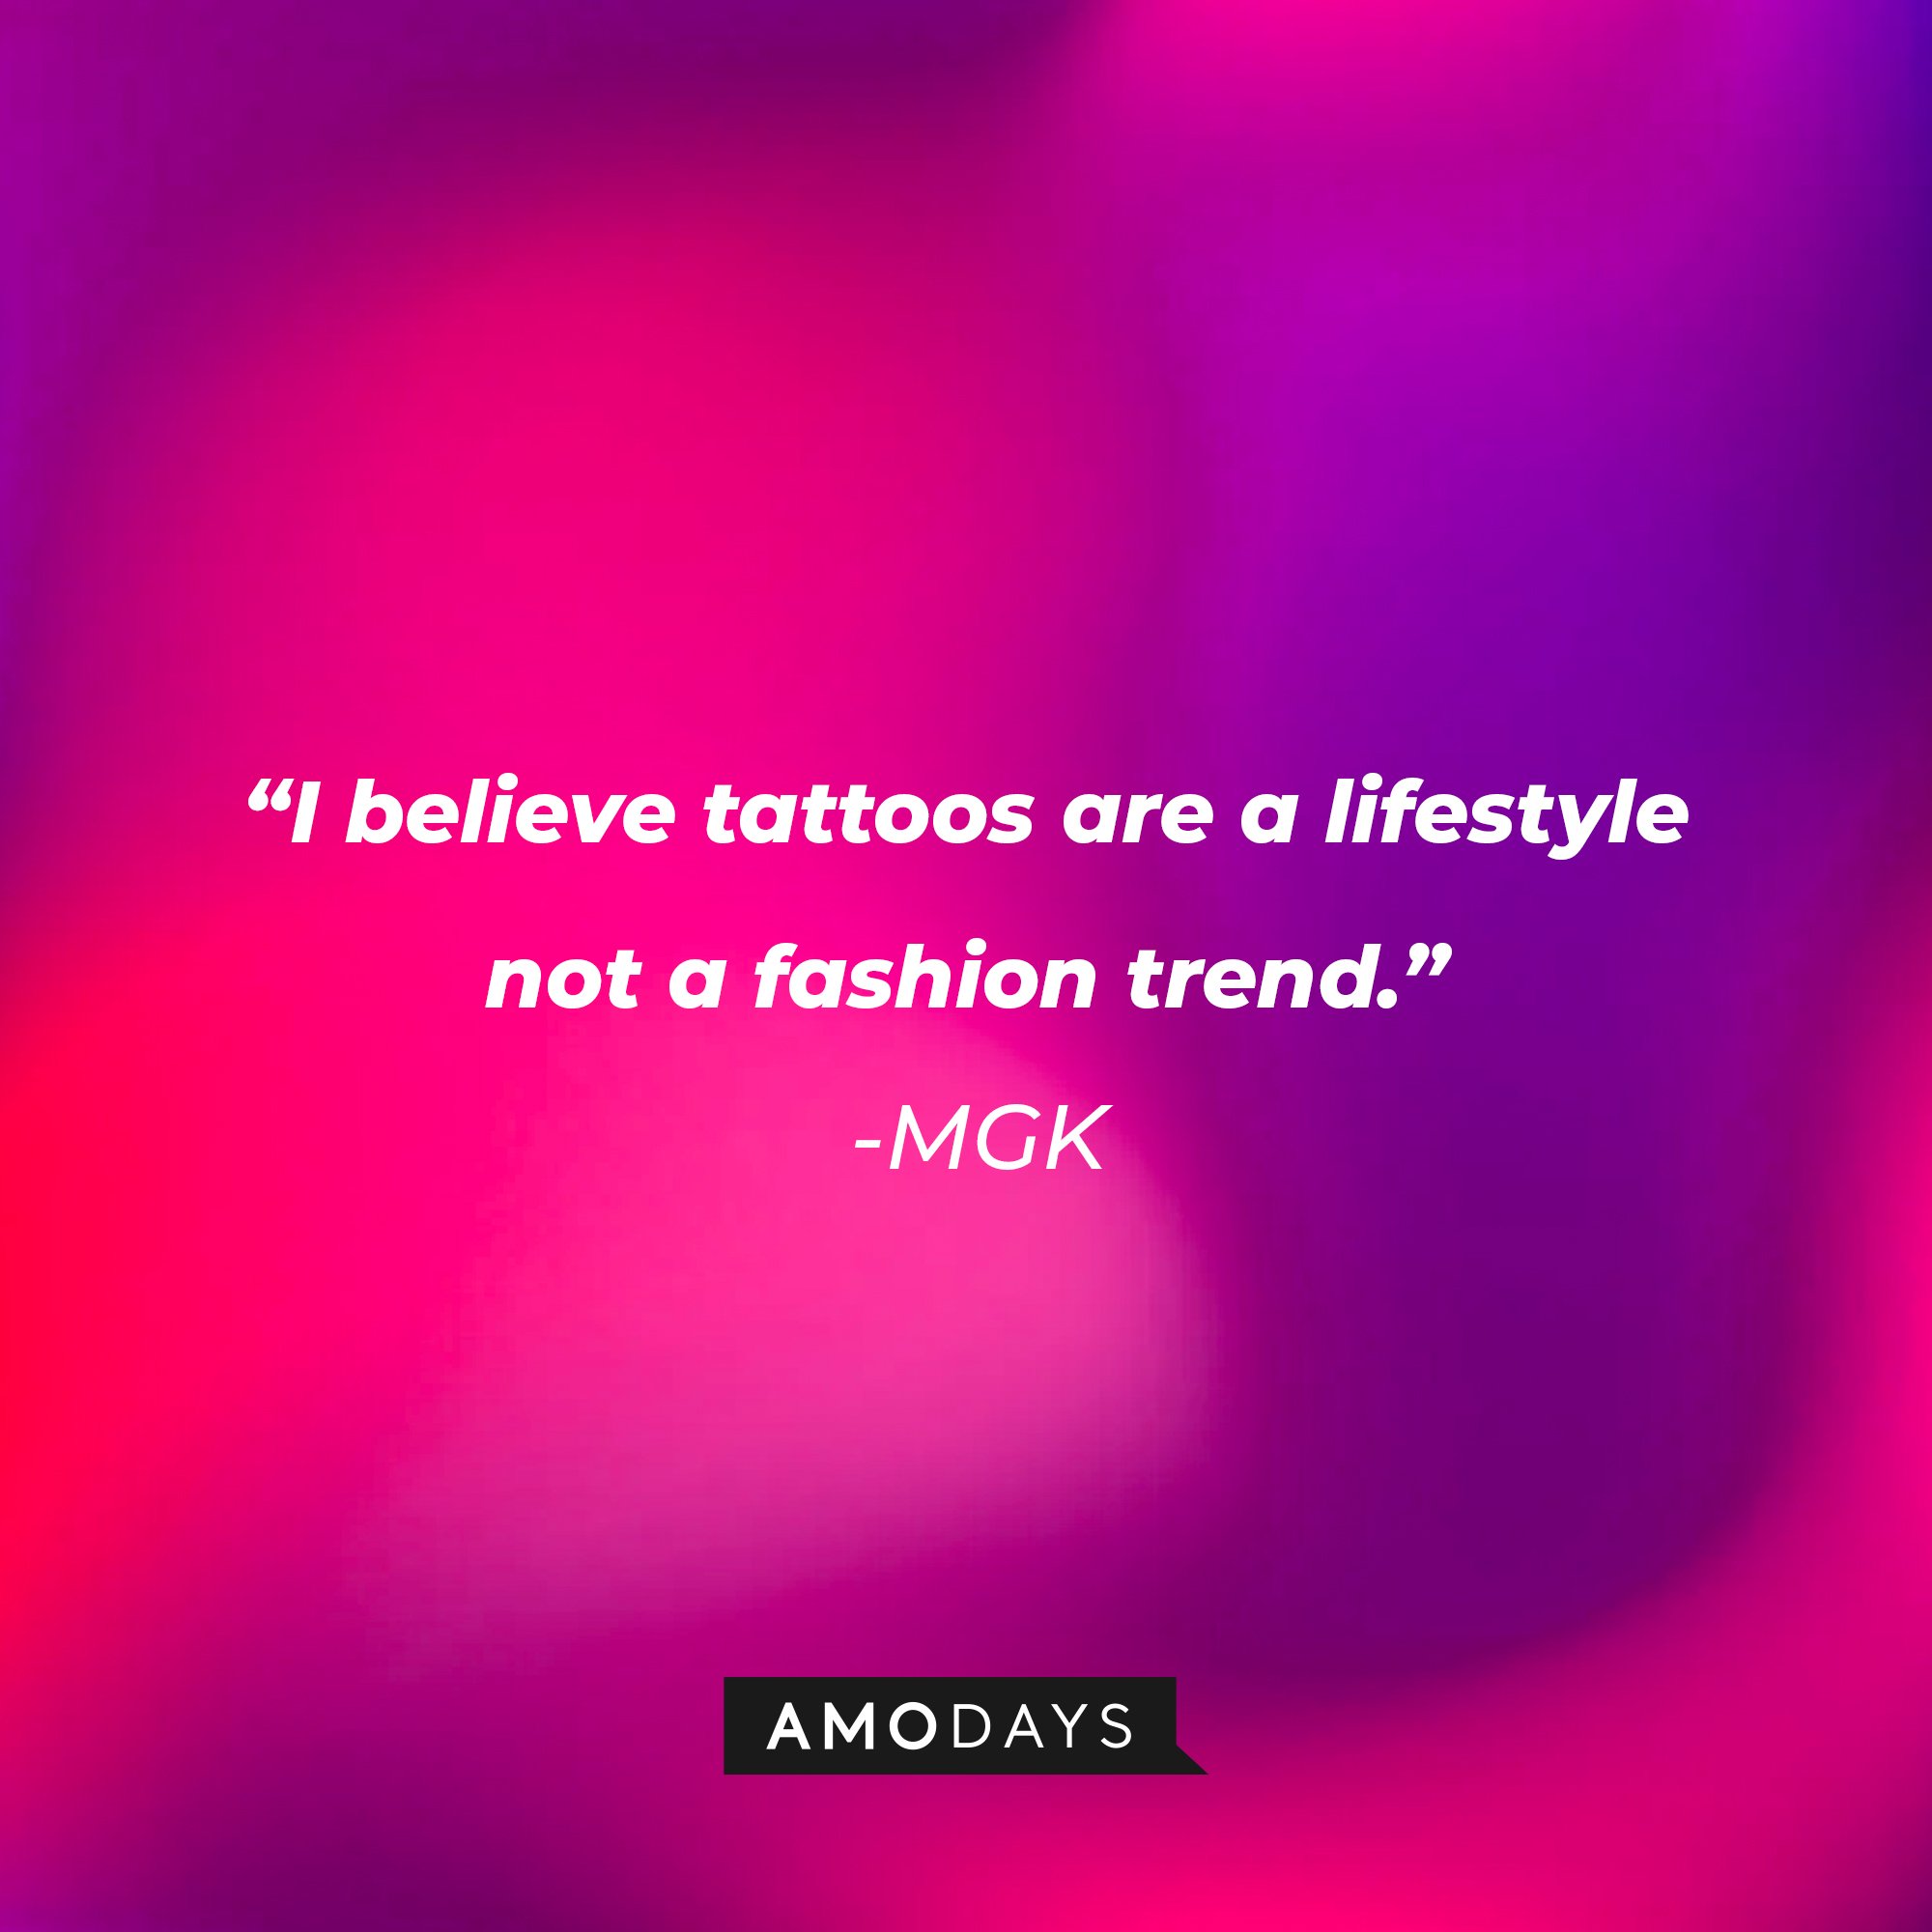 MGK's quote: "I believe tattoos are a lifestyle not a fashion trend." | Image: AmoDays